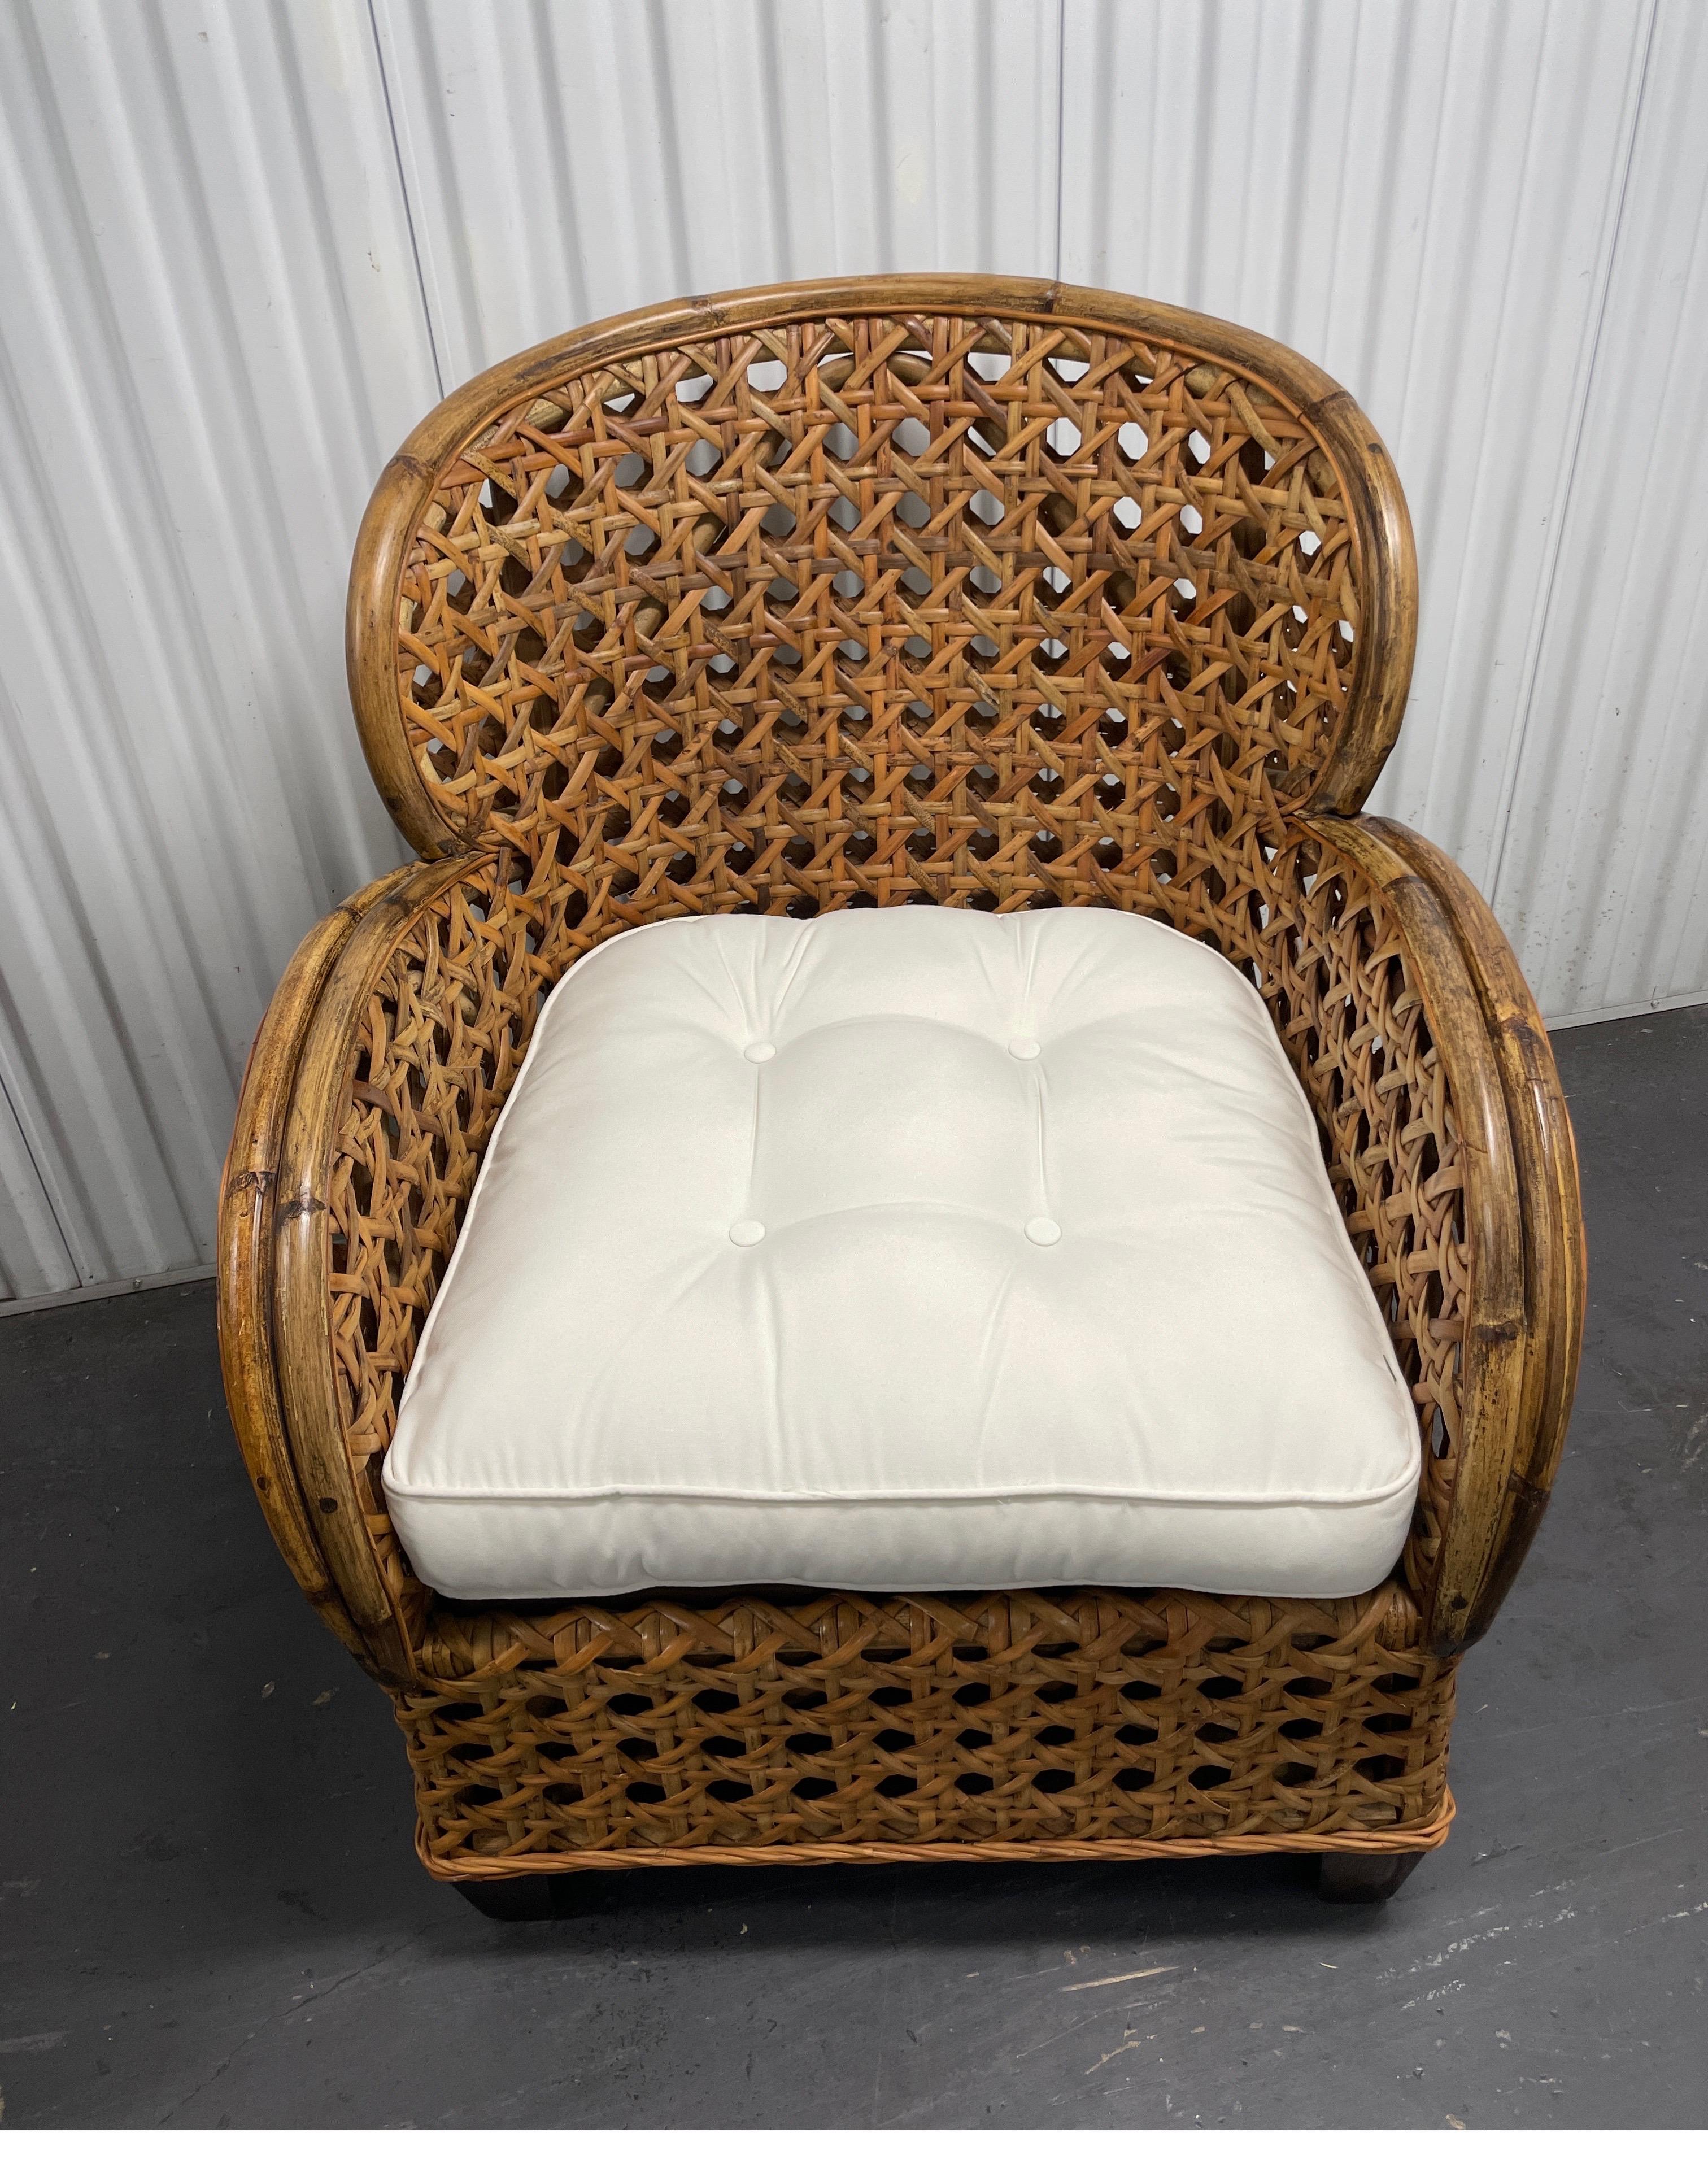 Vintage pair of rattan and cane arm / club chairs with white seat cushion.